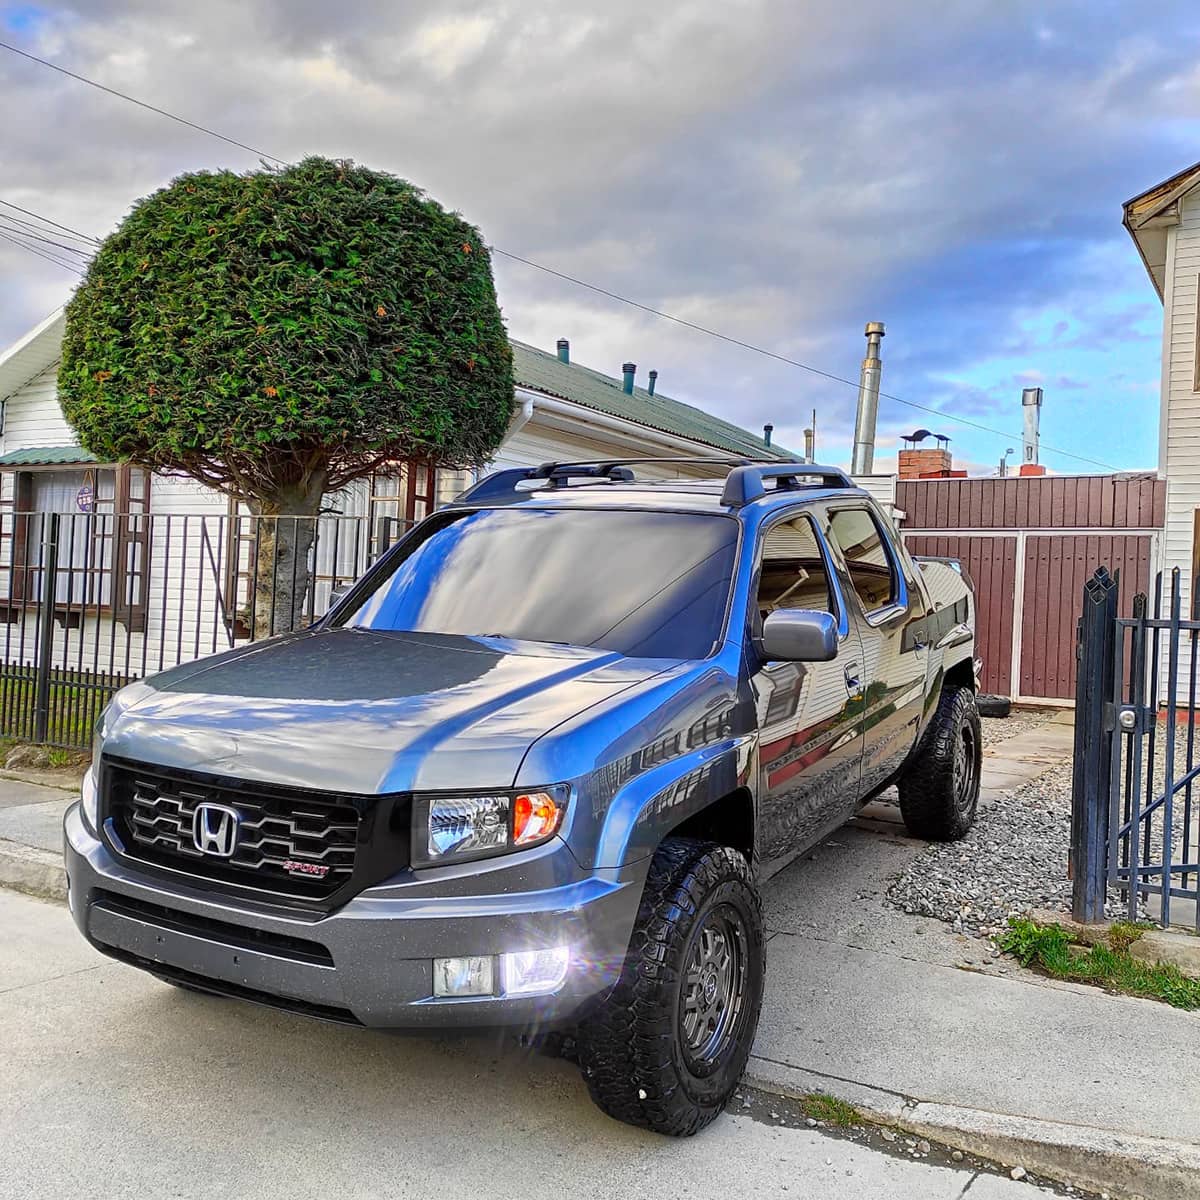 Lifted Honda RIdgeline with off road wheels and a lift